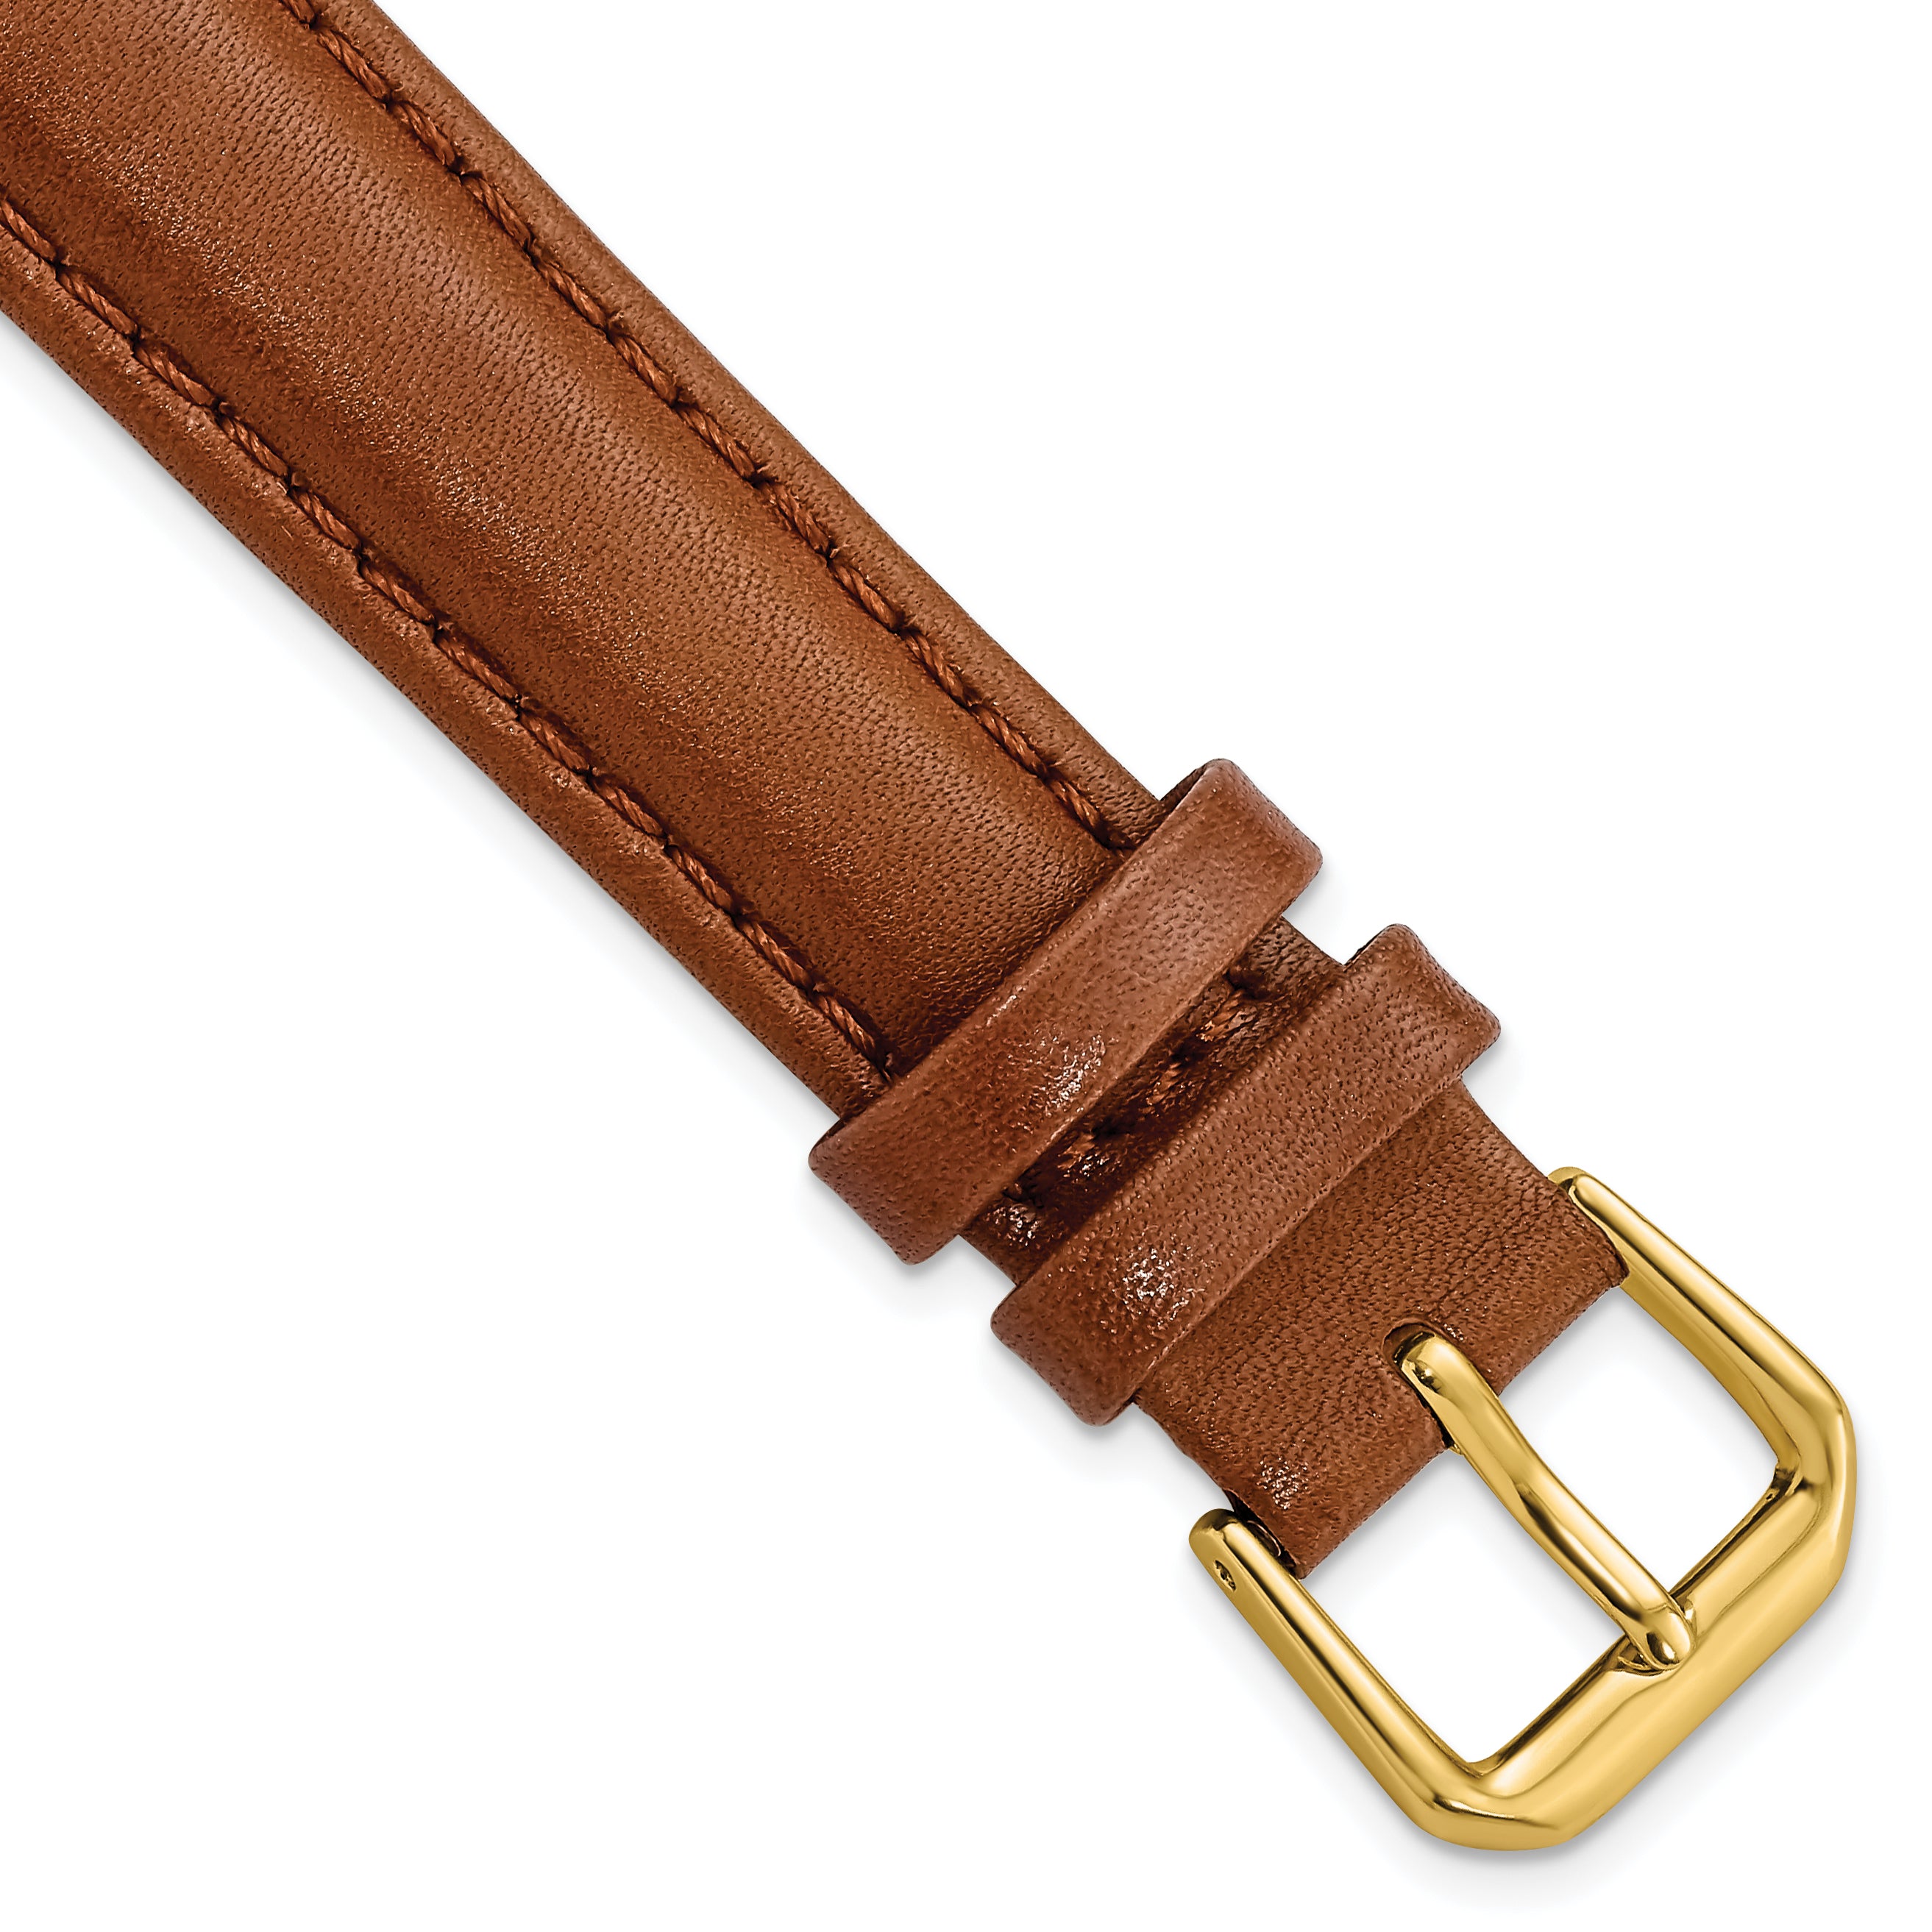 DeBeer 16mm Havana Smooth Leather with Gold-tone Buckle 7.5 inch Watch Band